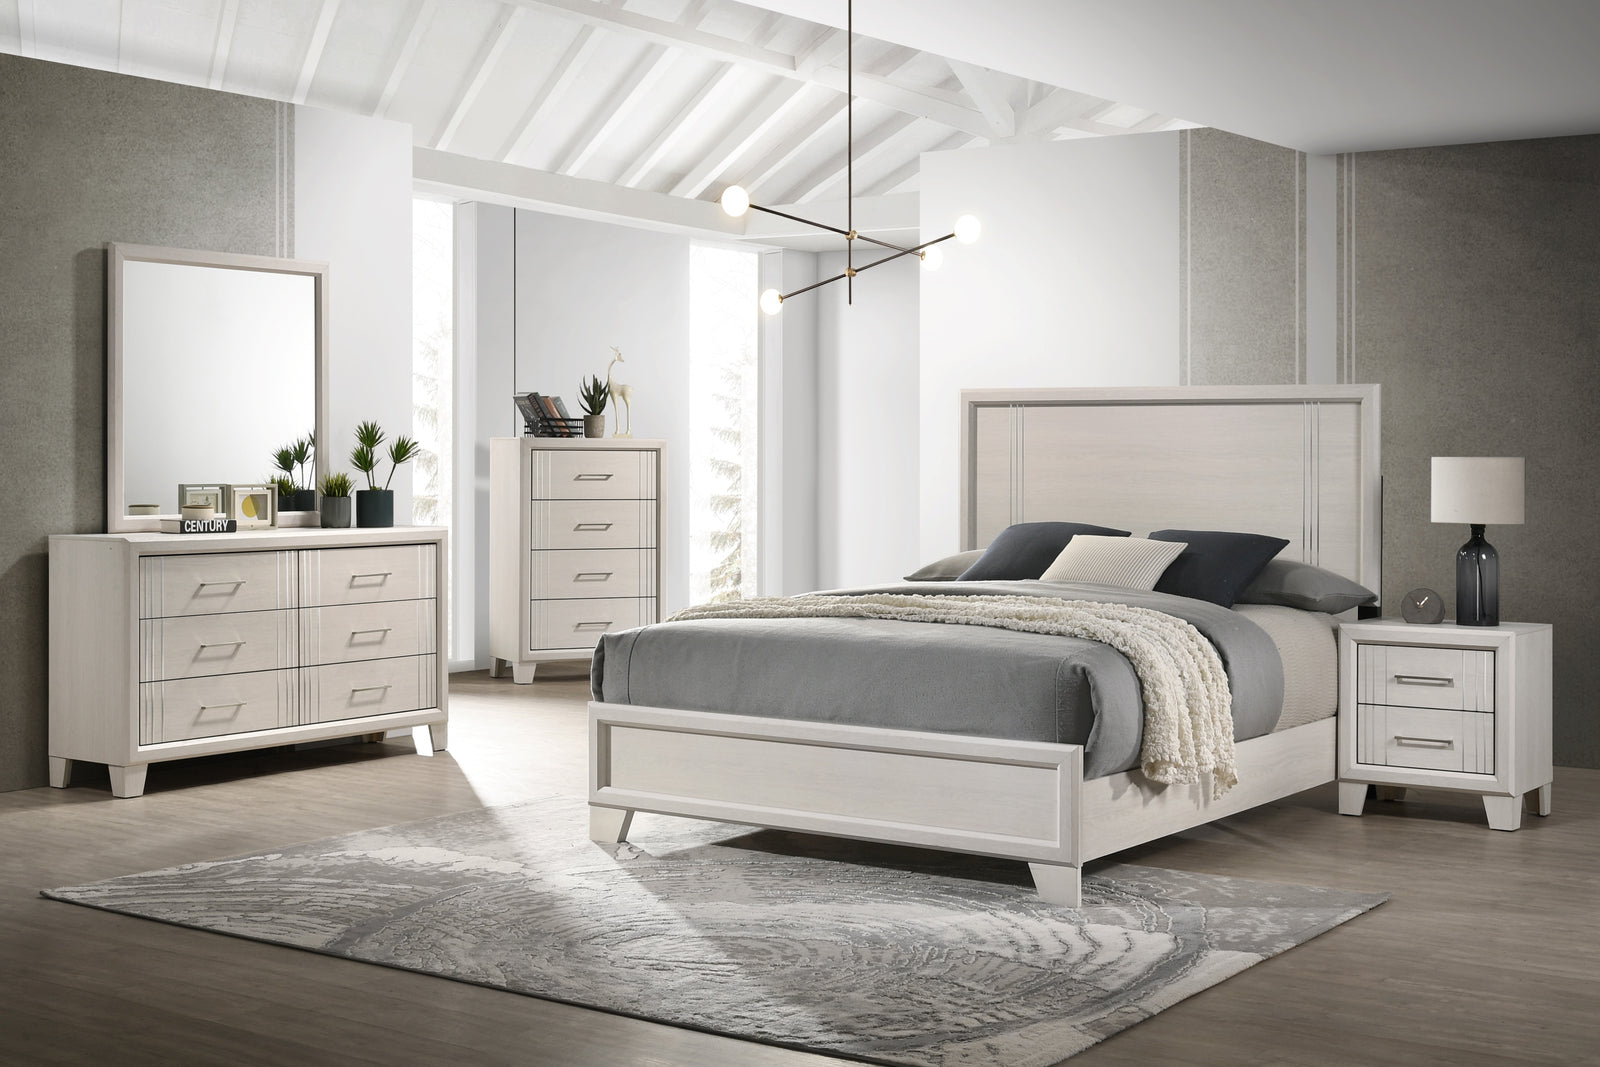 Charlie Cream Modern Contemporary Solid Wood And Veneers Queen Bed